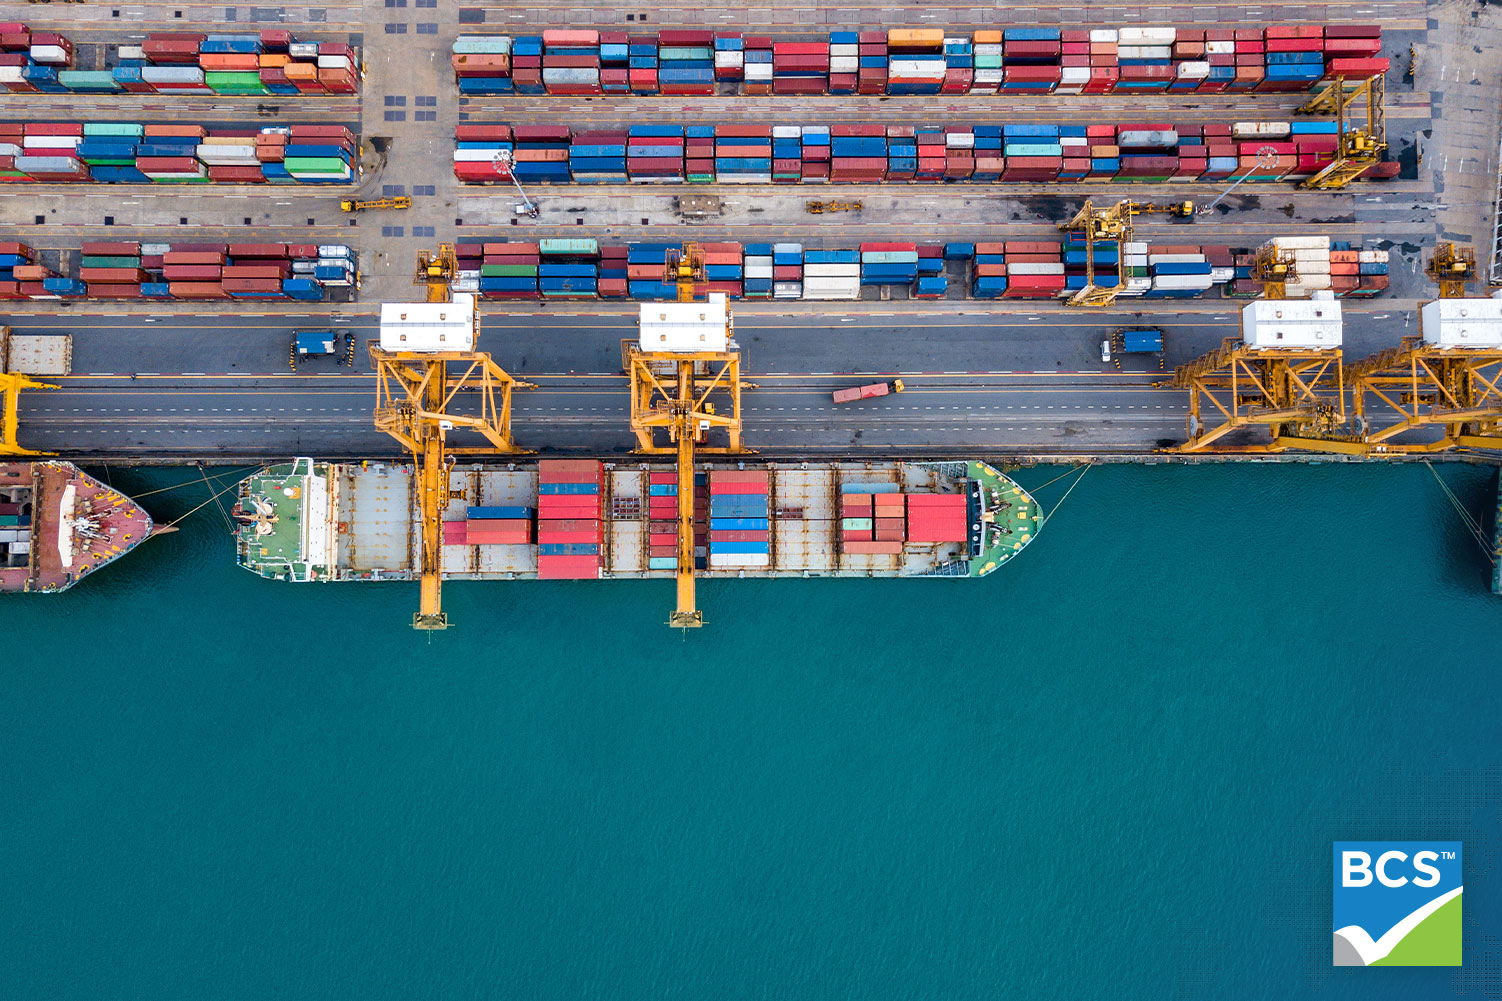 bird of eye view of containers at a dock